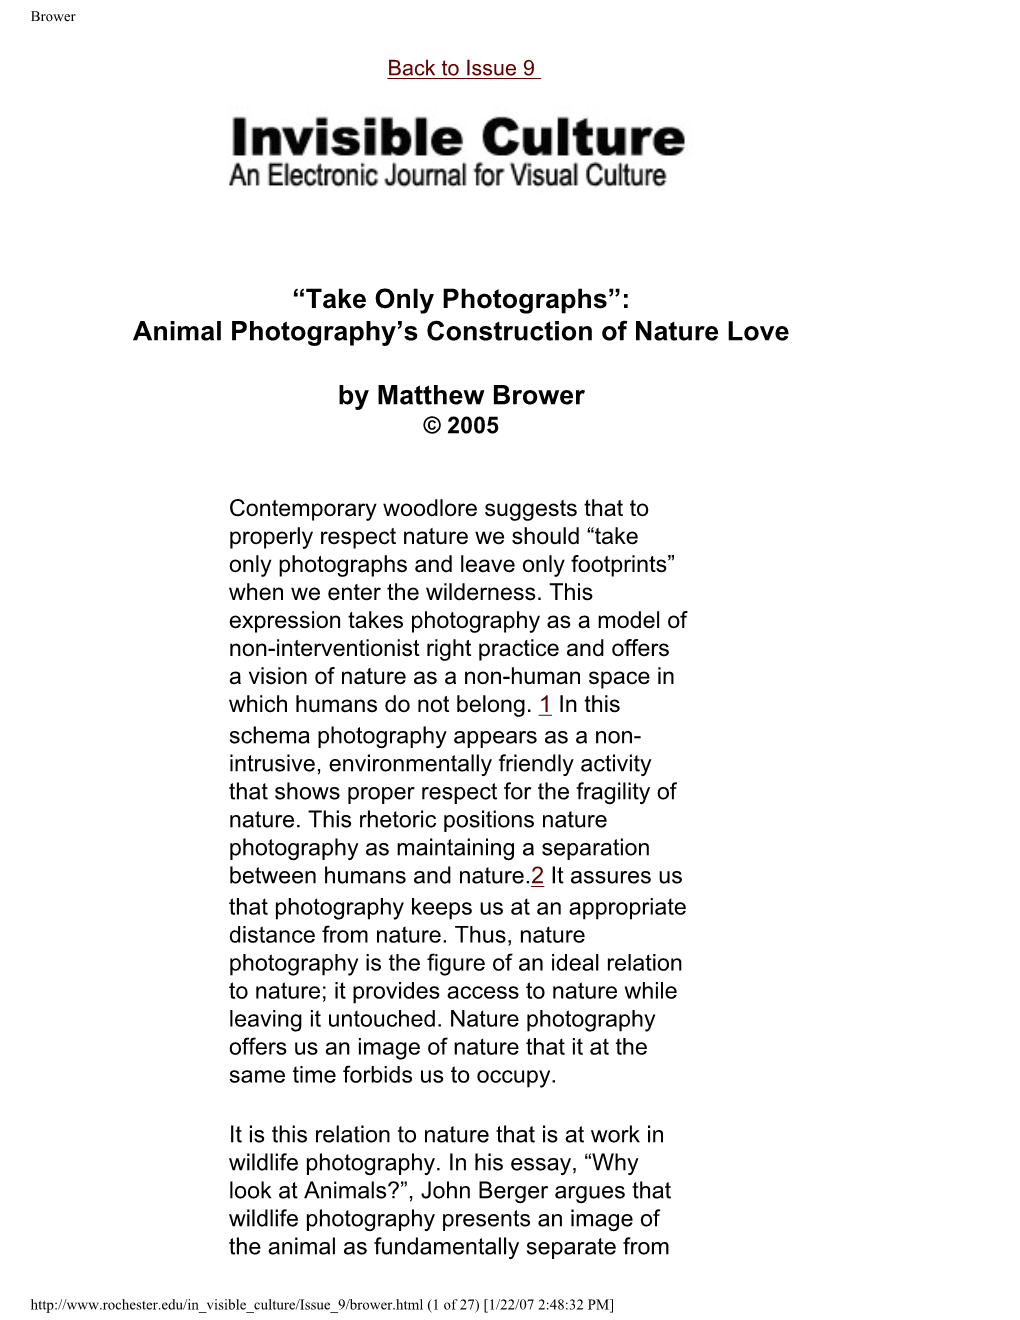 “Take Only Photographs”: Animal Photography’S Construction of Nature Love